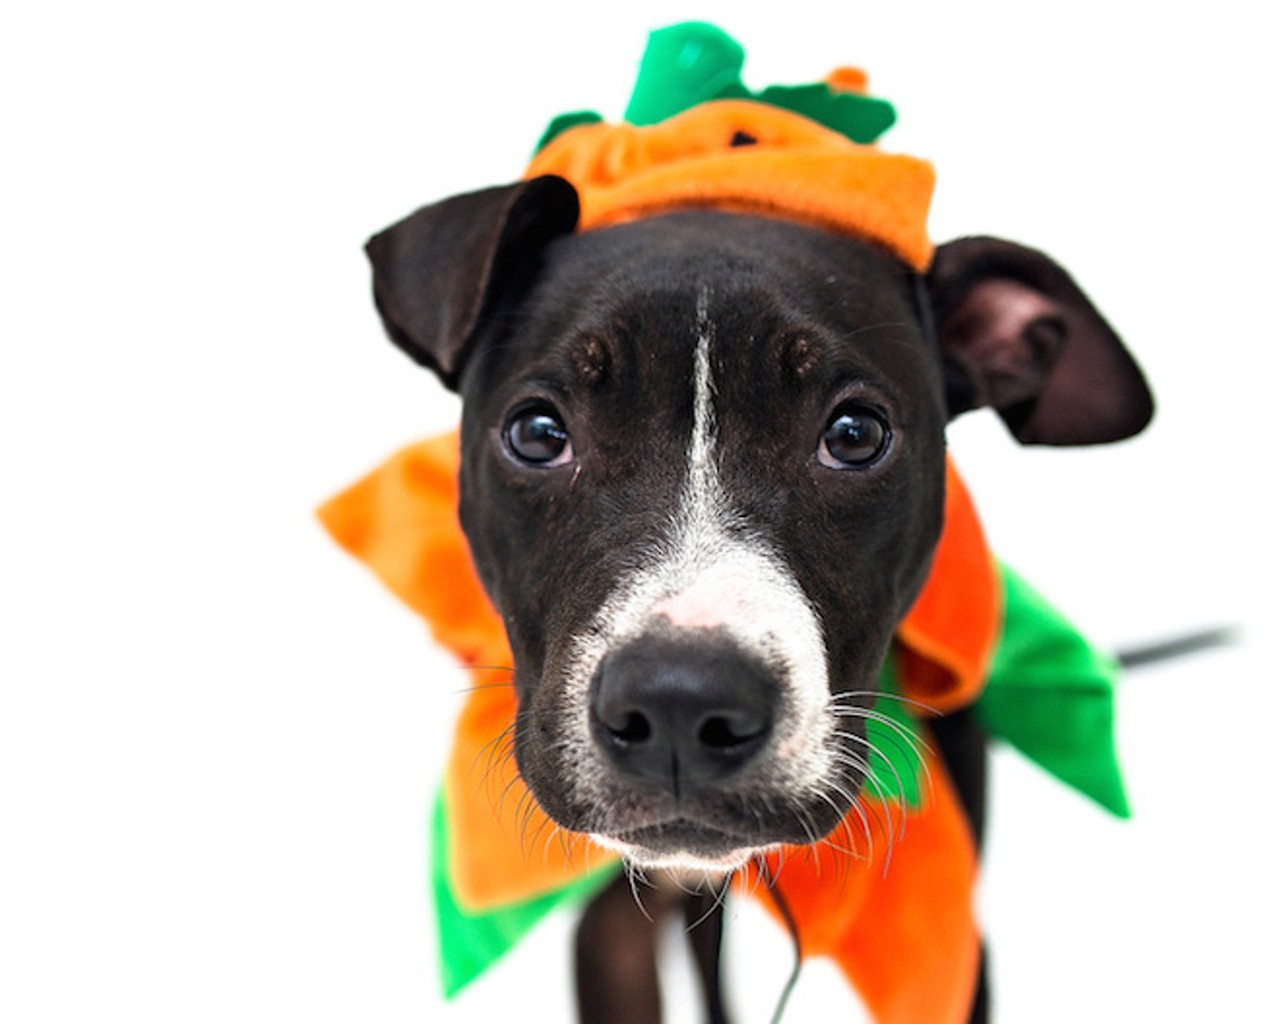 36 adoptable cats and dogs who will totally let you dress them up for Halloween